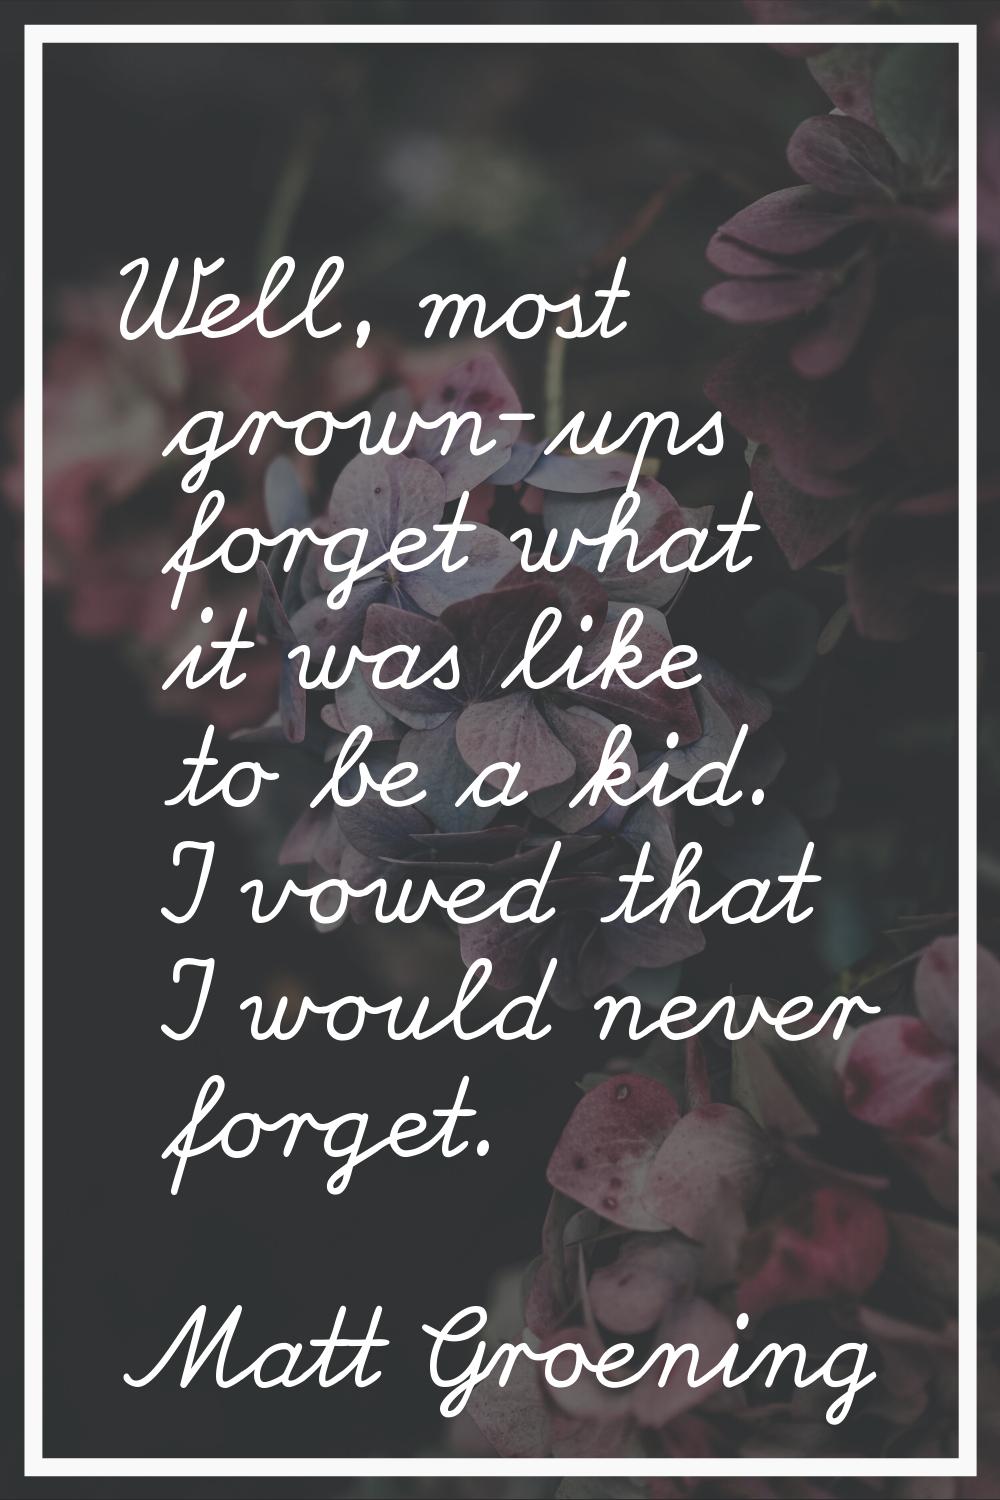 Well, most grown-ups forget what it was like to be a kid. I vowed that I would never forget.